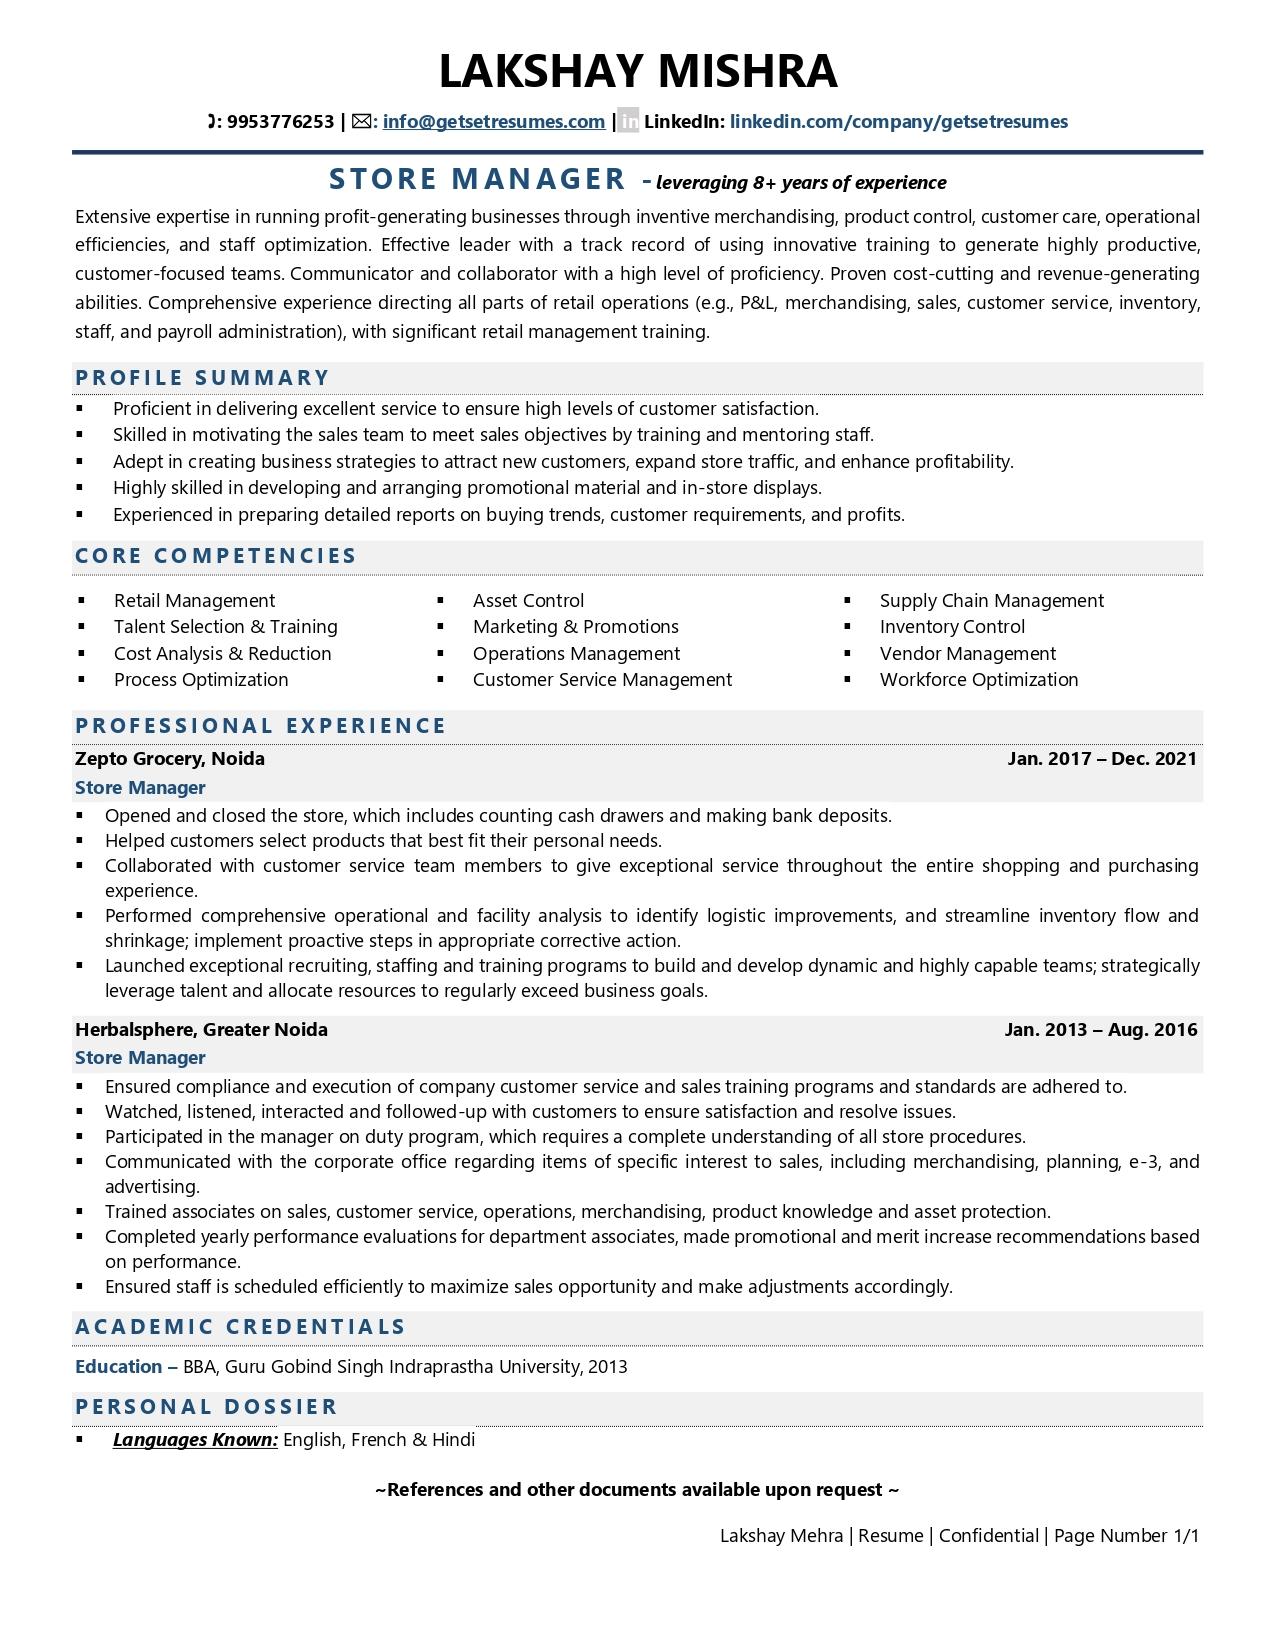 Store Manager - Resume Example & Template